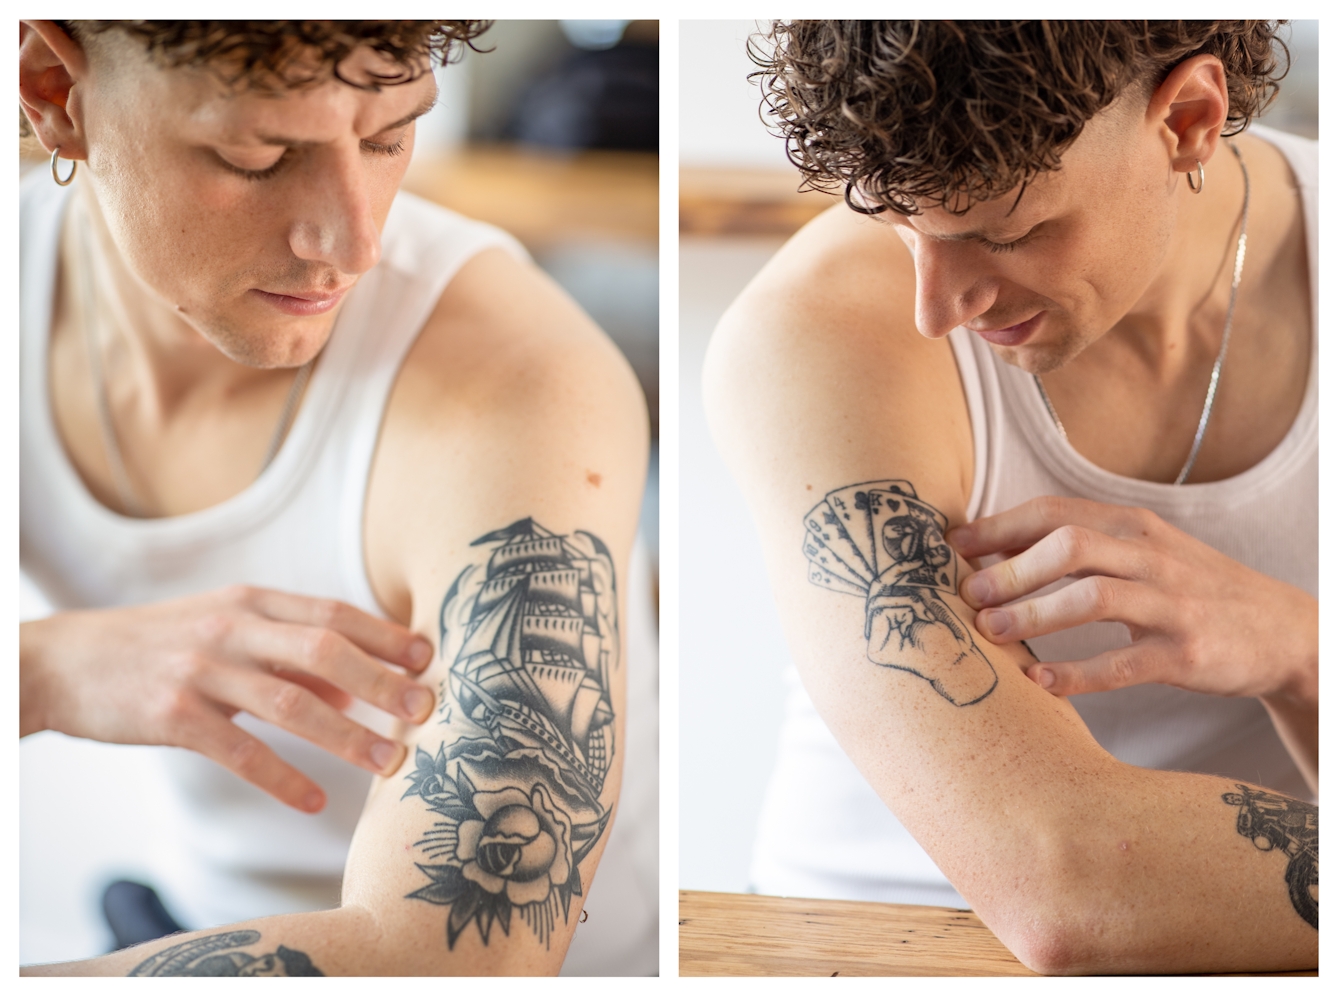 Photographic diptych. Both images show the same man, dressed in a white vest, his arms exposed. Both views are close-in, focussing on his upper arms and face. The image on the left shows his left bicep and the large tattoo of a tall ship in full sail resting on top of a rose. The image on the right shows his right bicep and the tattoo of a hand holding 5 playing cards. 